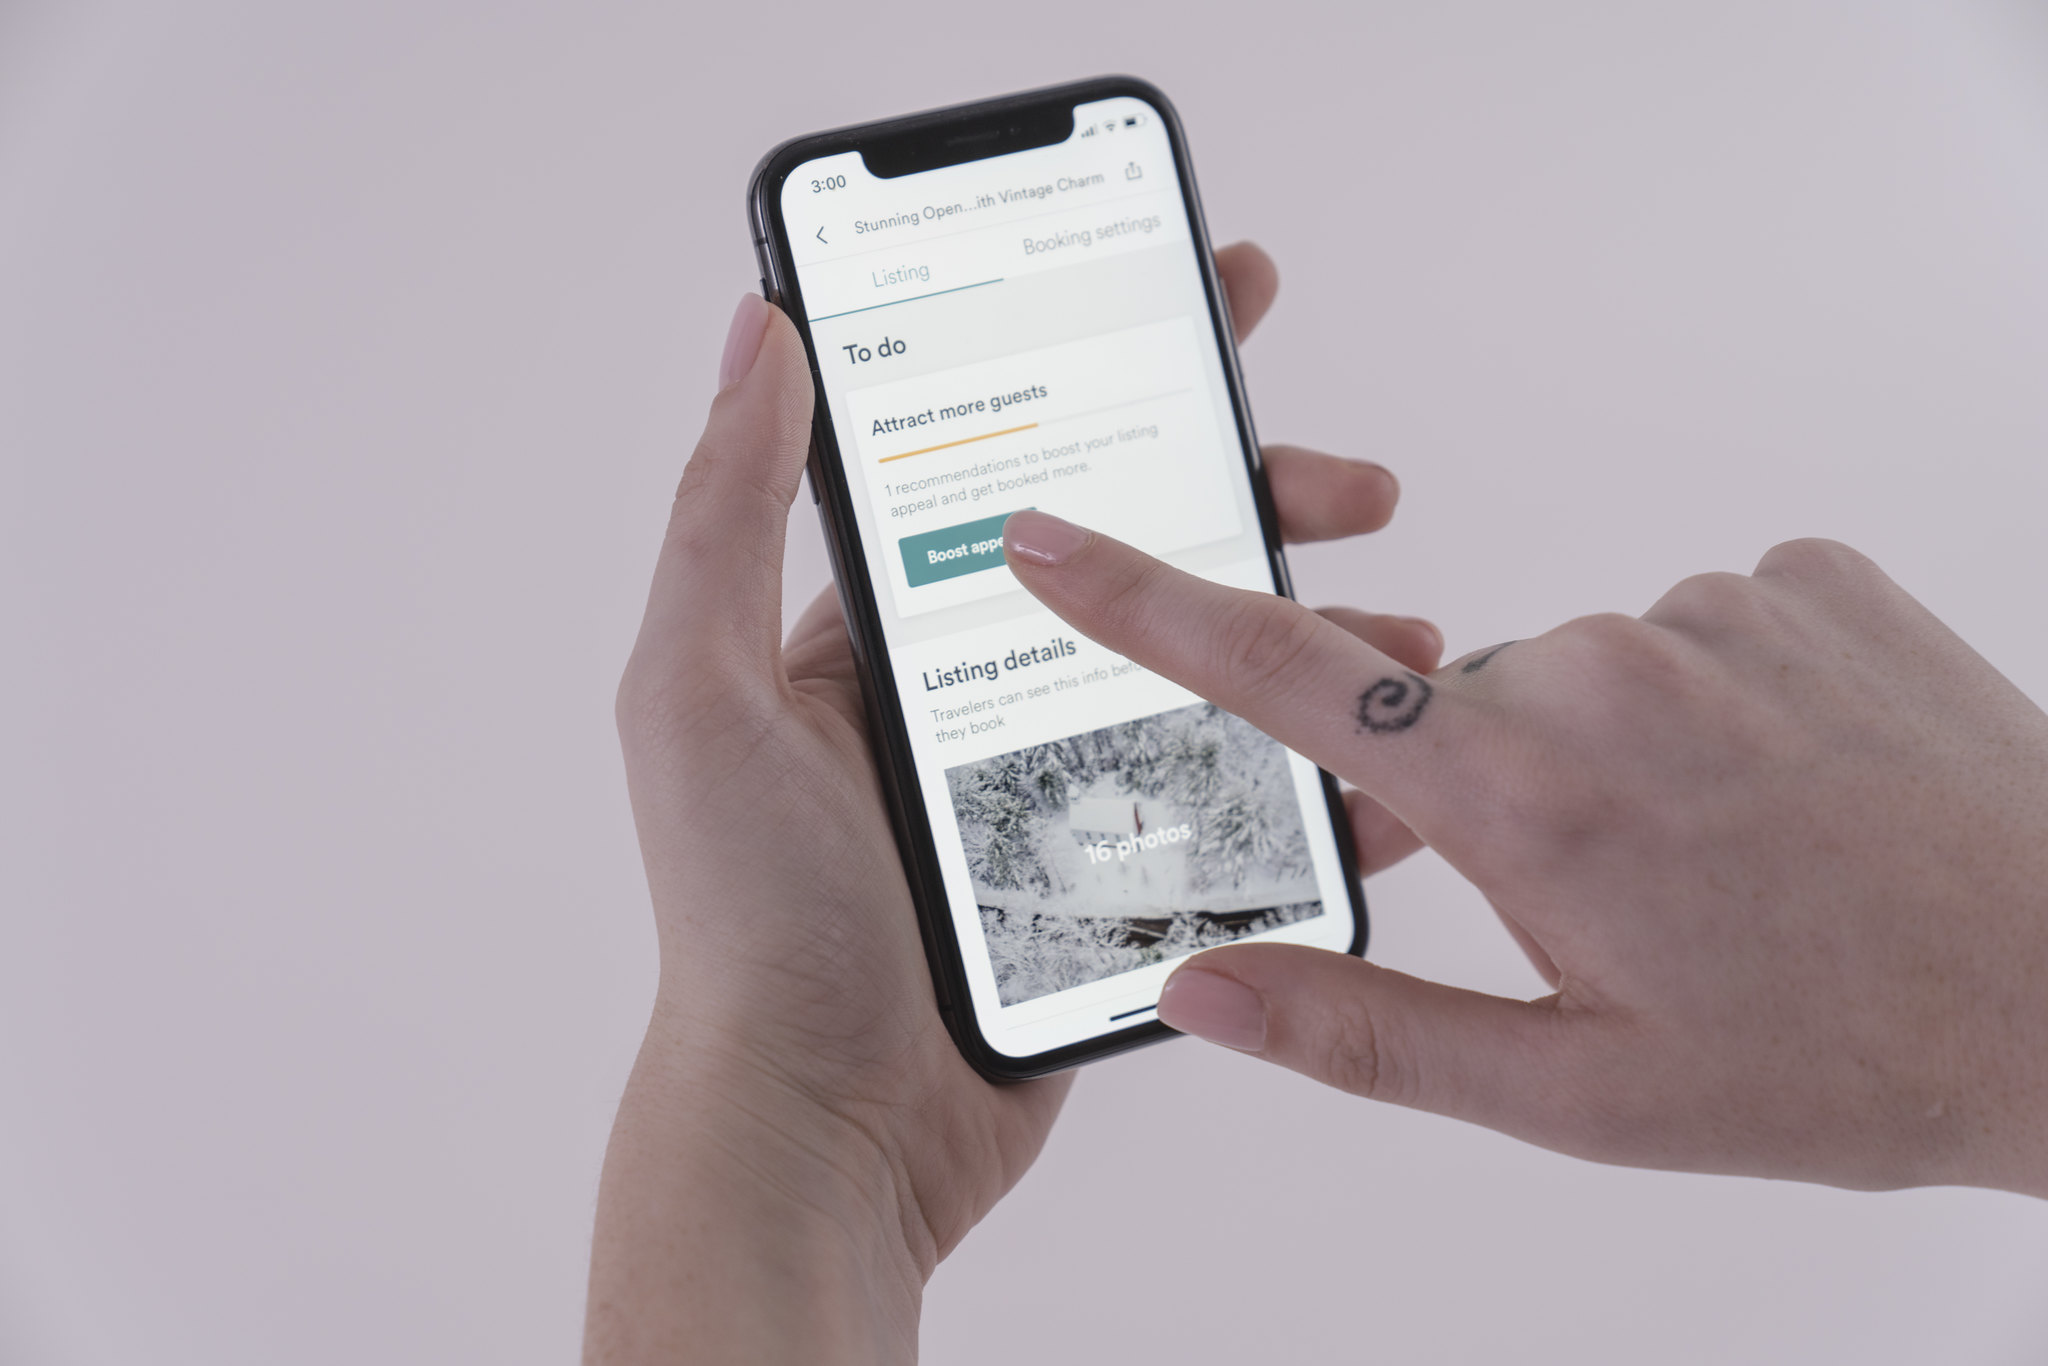 Hands hold a smartphone with the Airbnb app open.